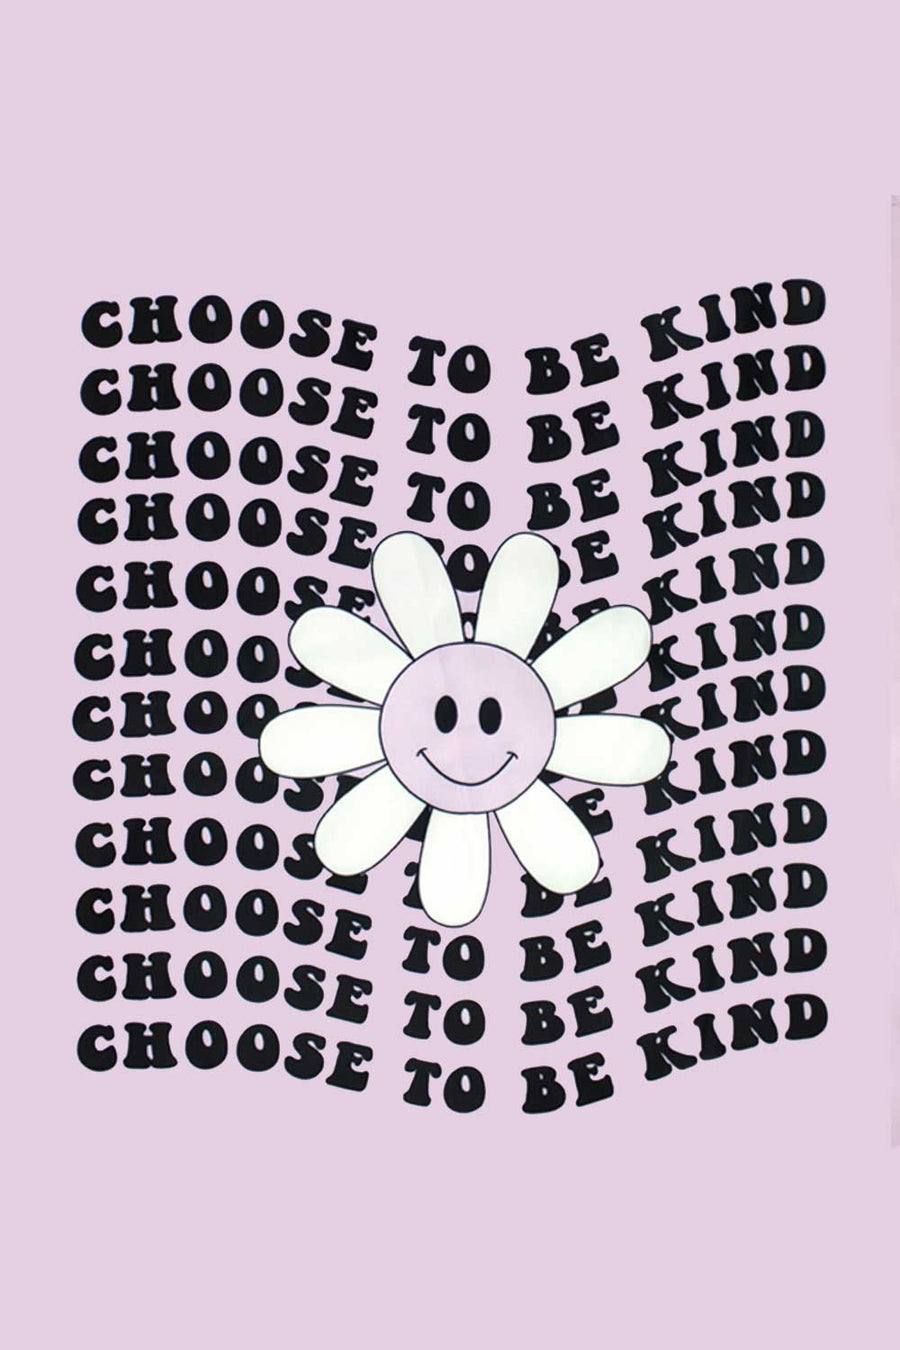 Choose Kind | Recycled Tote